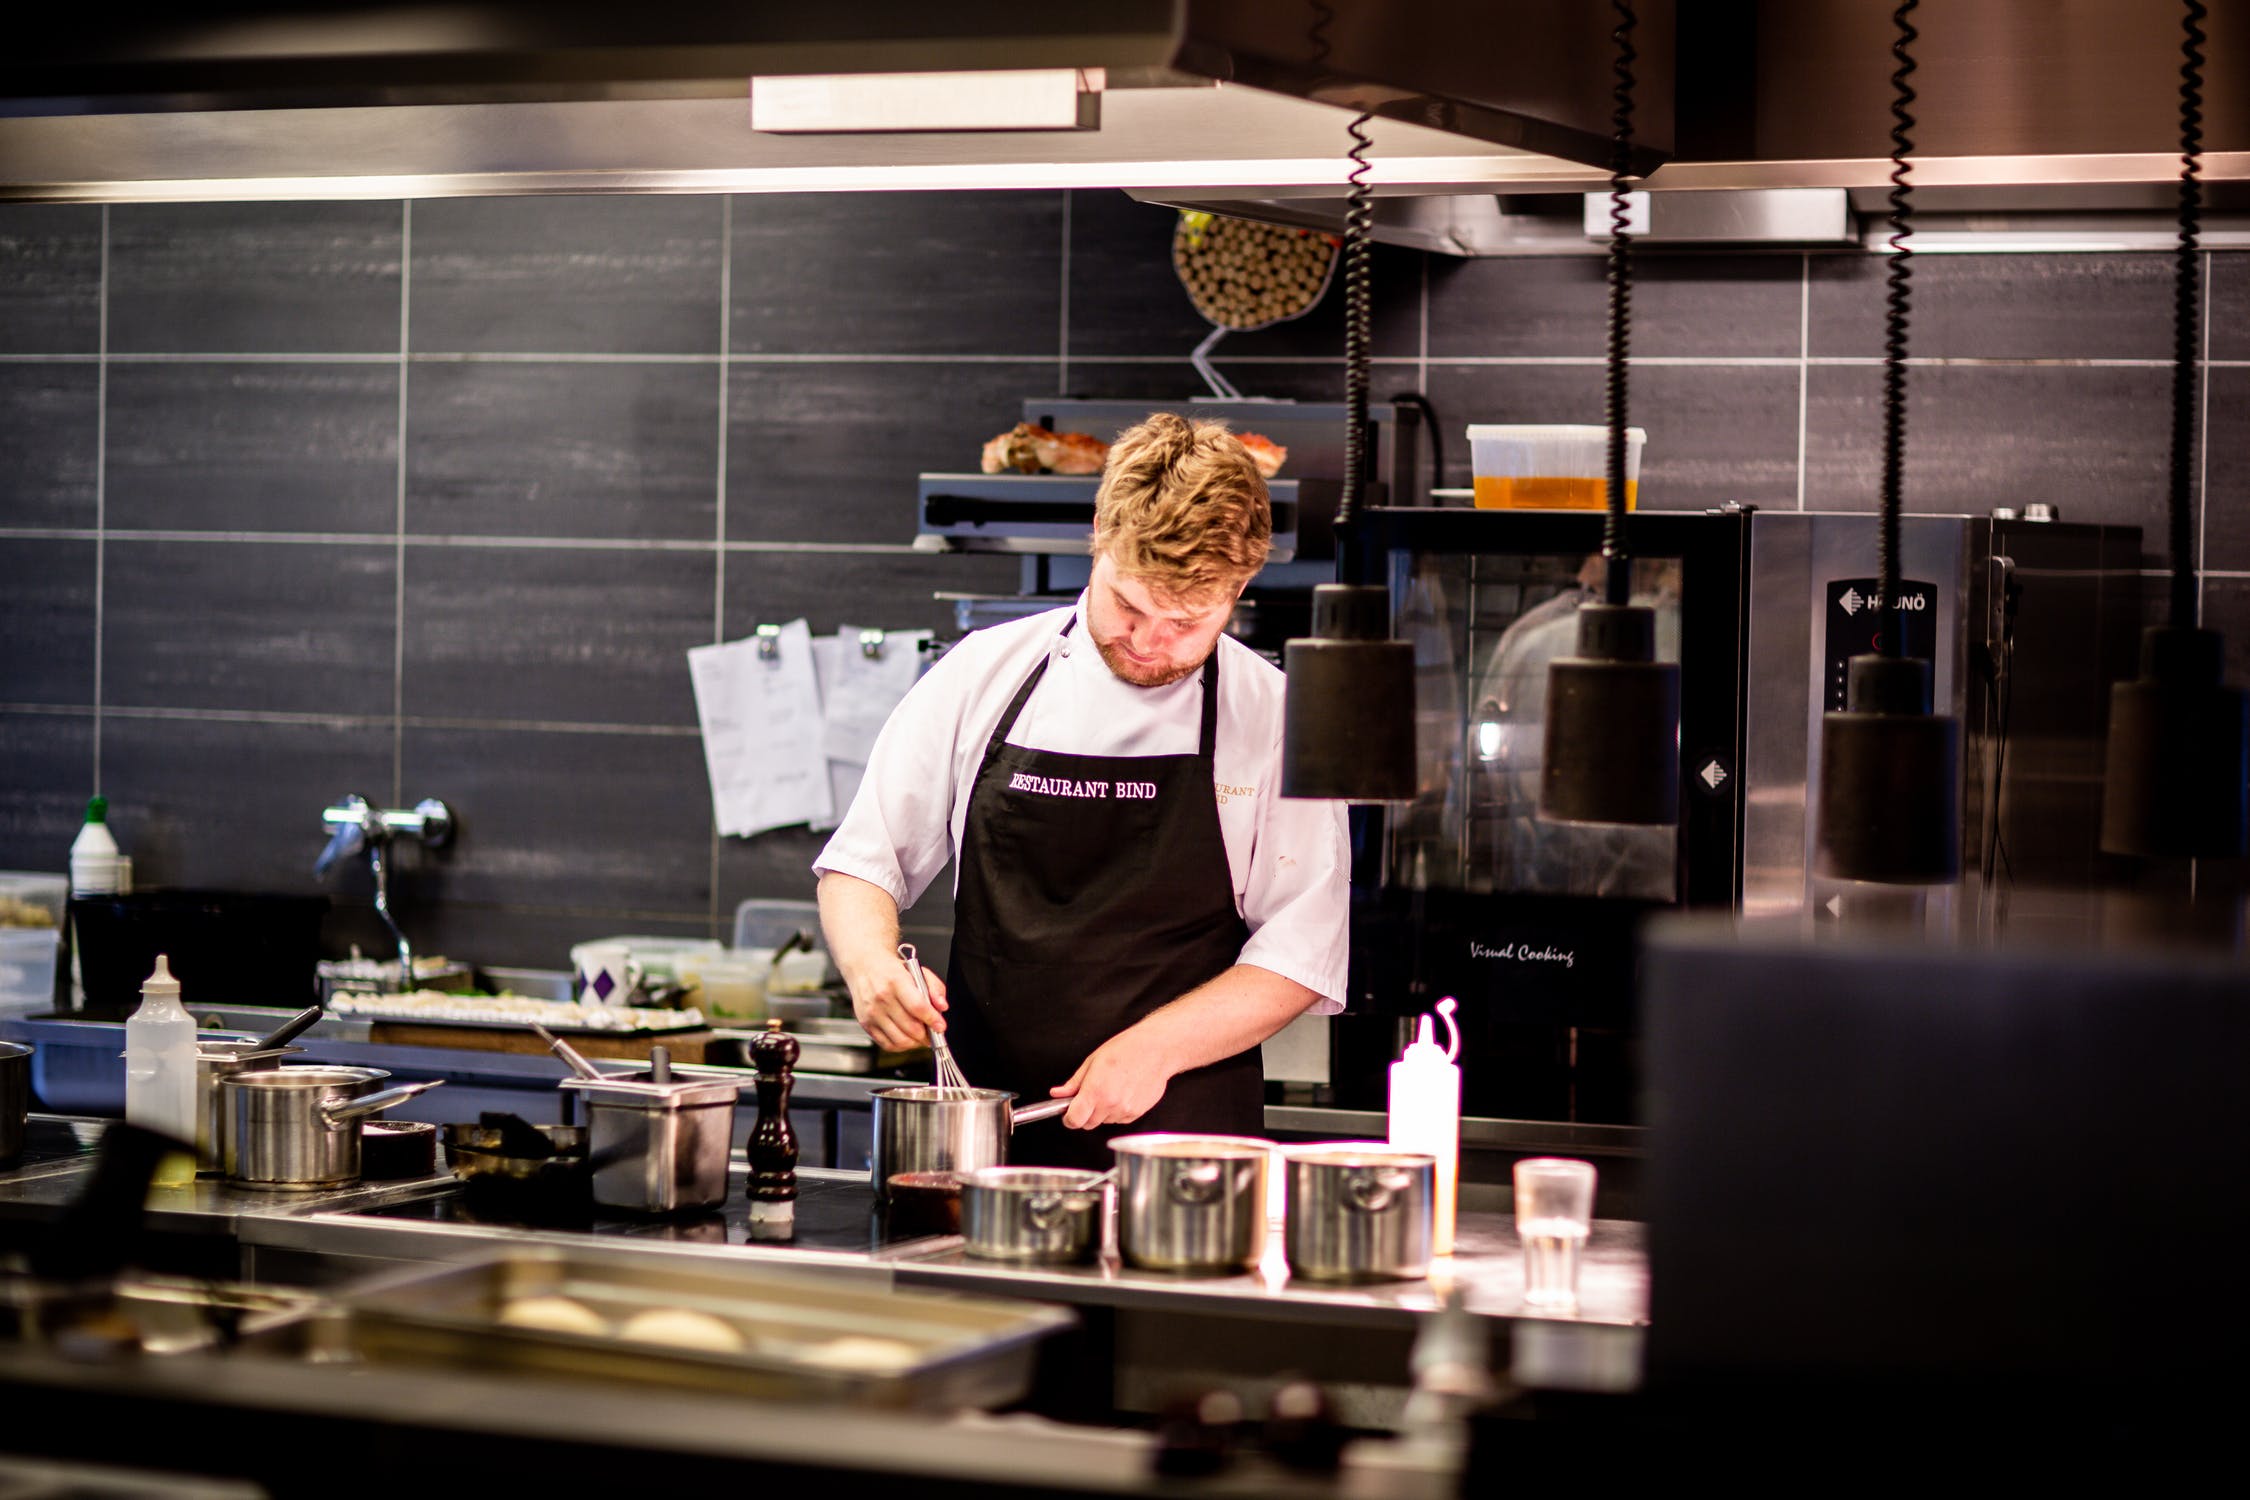 The complete list of commercial kitchen equipment for restaurants